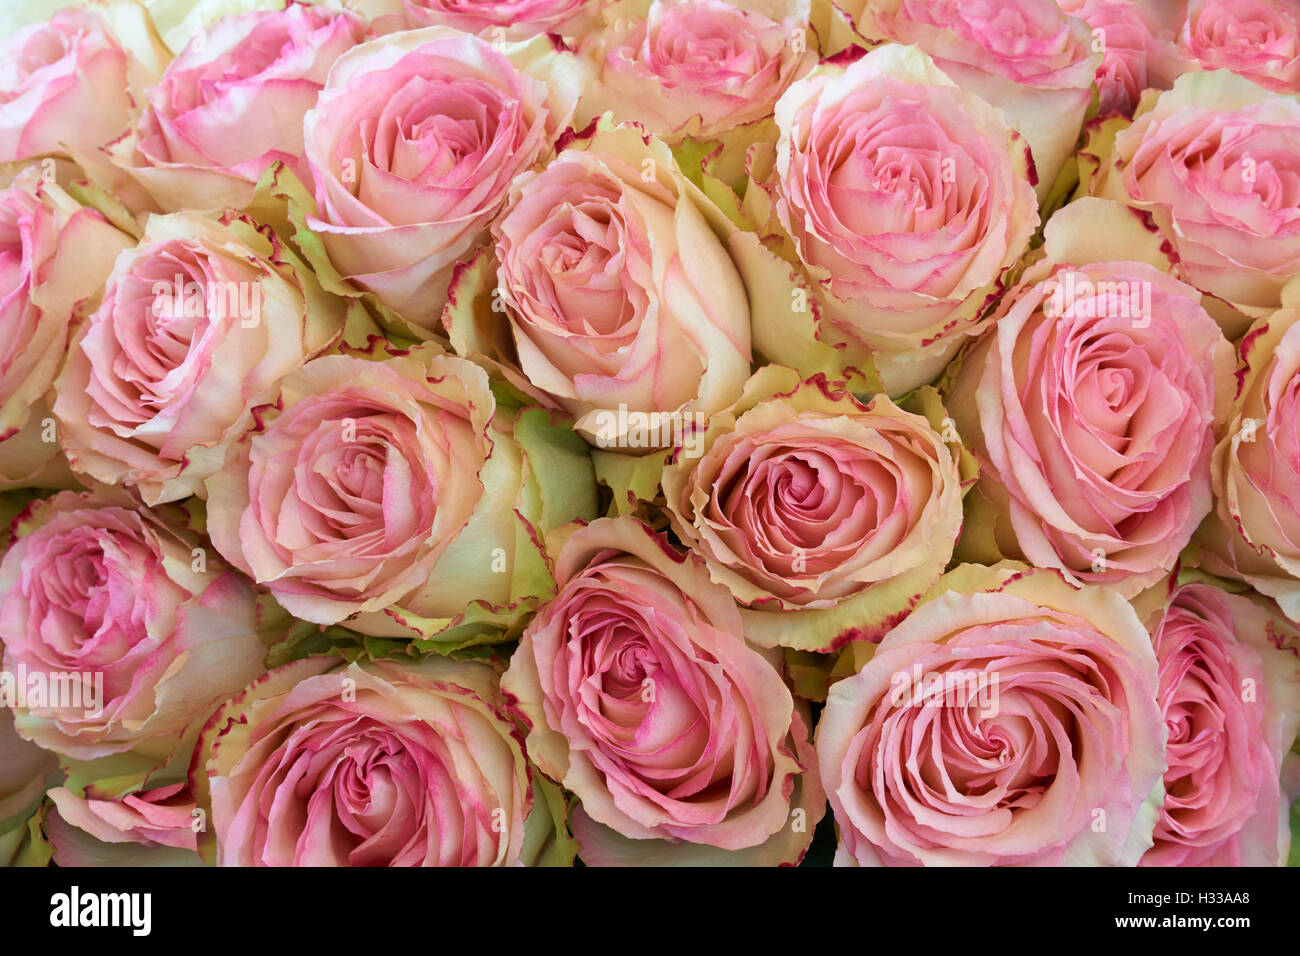 Heap of pink roses as floral background Stock Photo